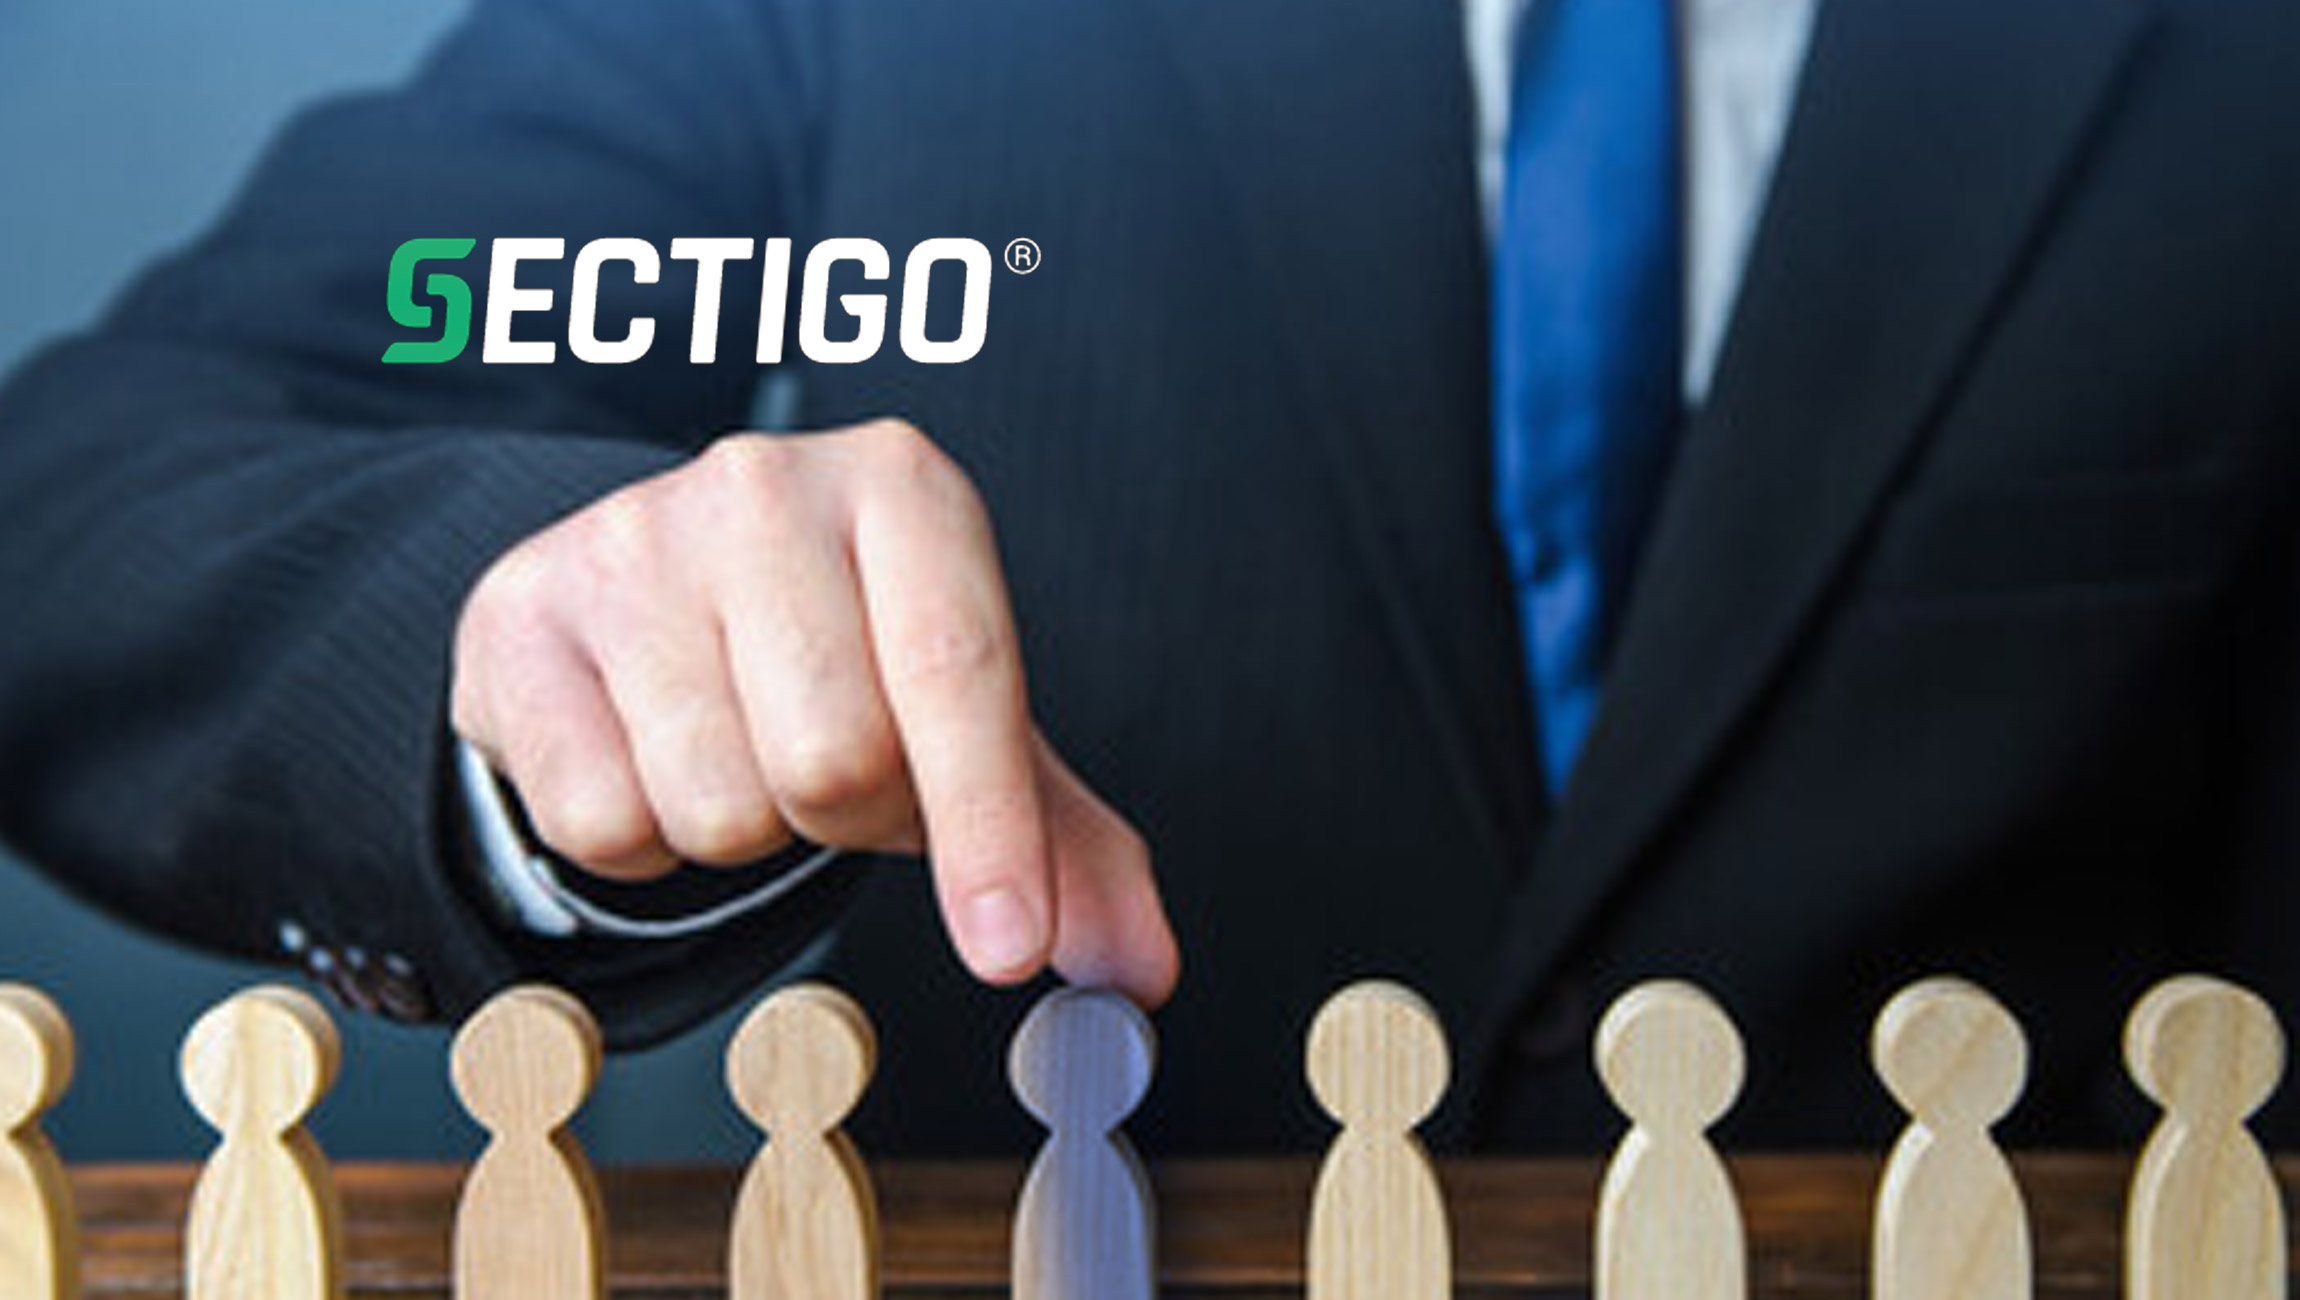 Sectigo Announces Executive Appointment of Christopher Bray as Senior Vice President of Partner and eCommerce Sales Channels